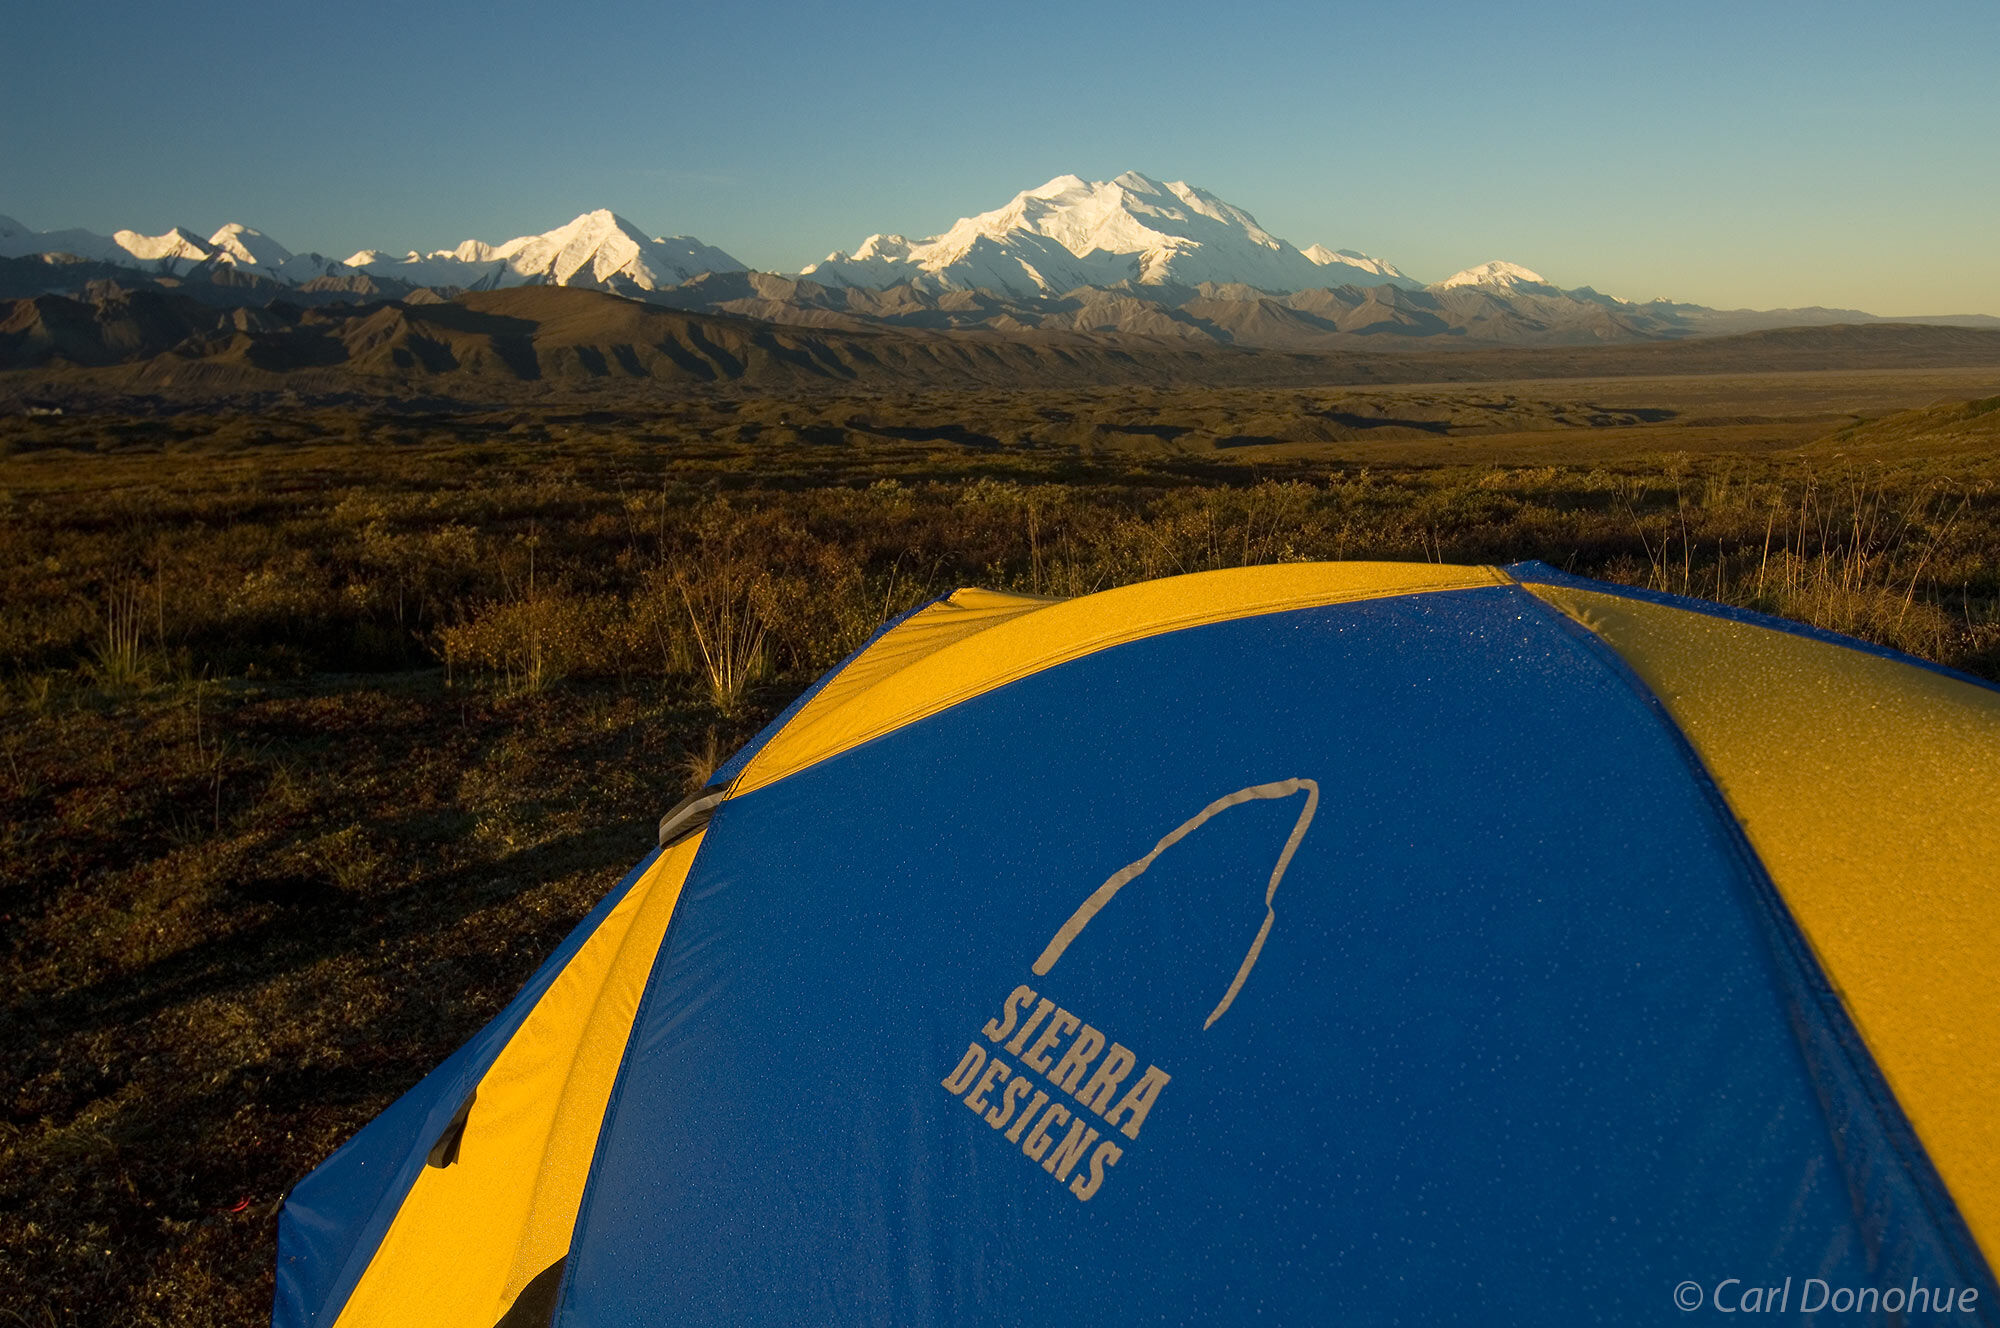 Backcountry camping, Sierra Designs tent covered in dew and frost one crisp fall morning, Mt. McKinley, Denali, Denali National...